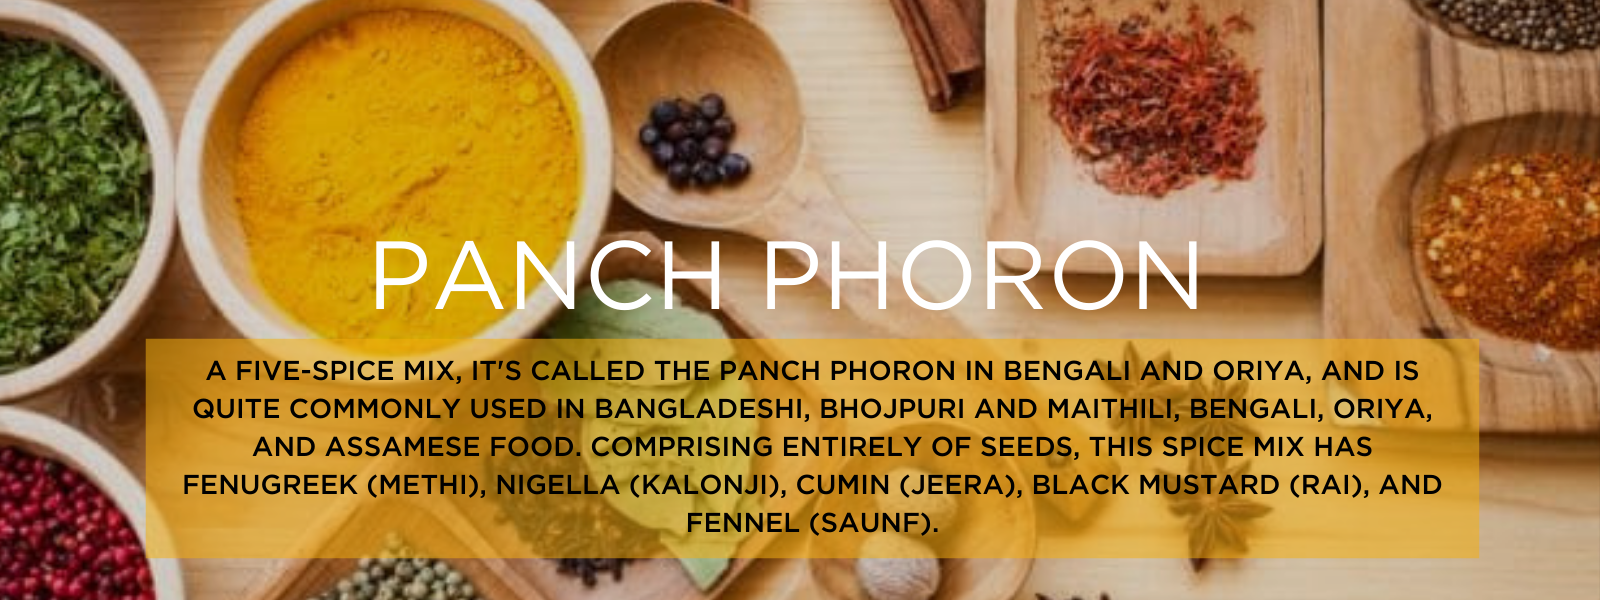 Panch Phoron - Health Benefits, Uses and Important Facts